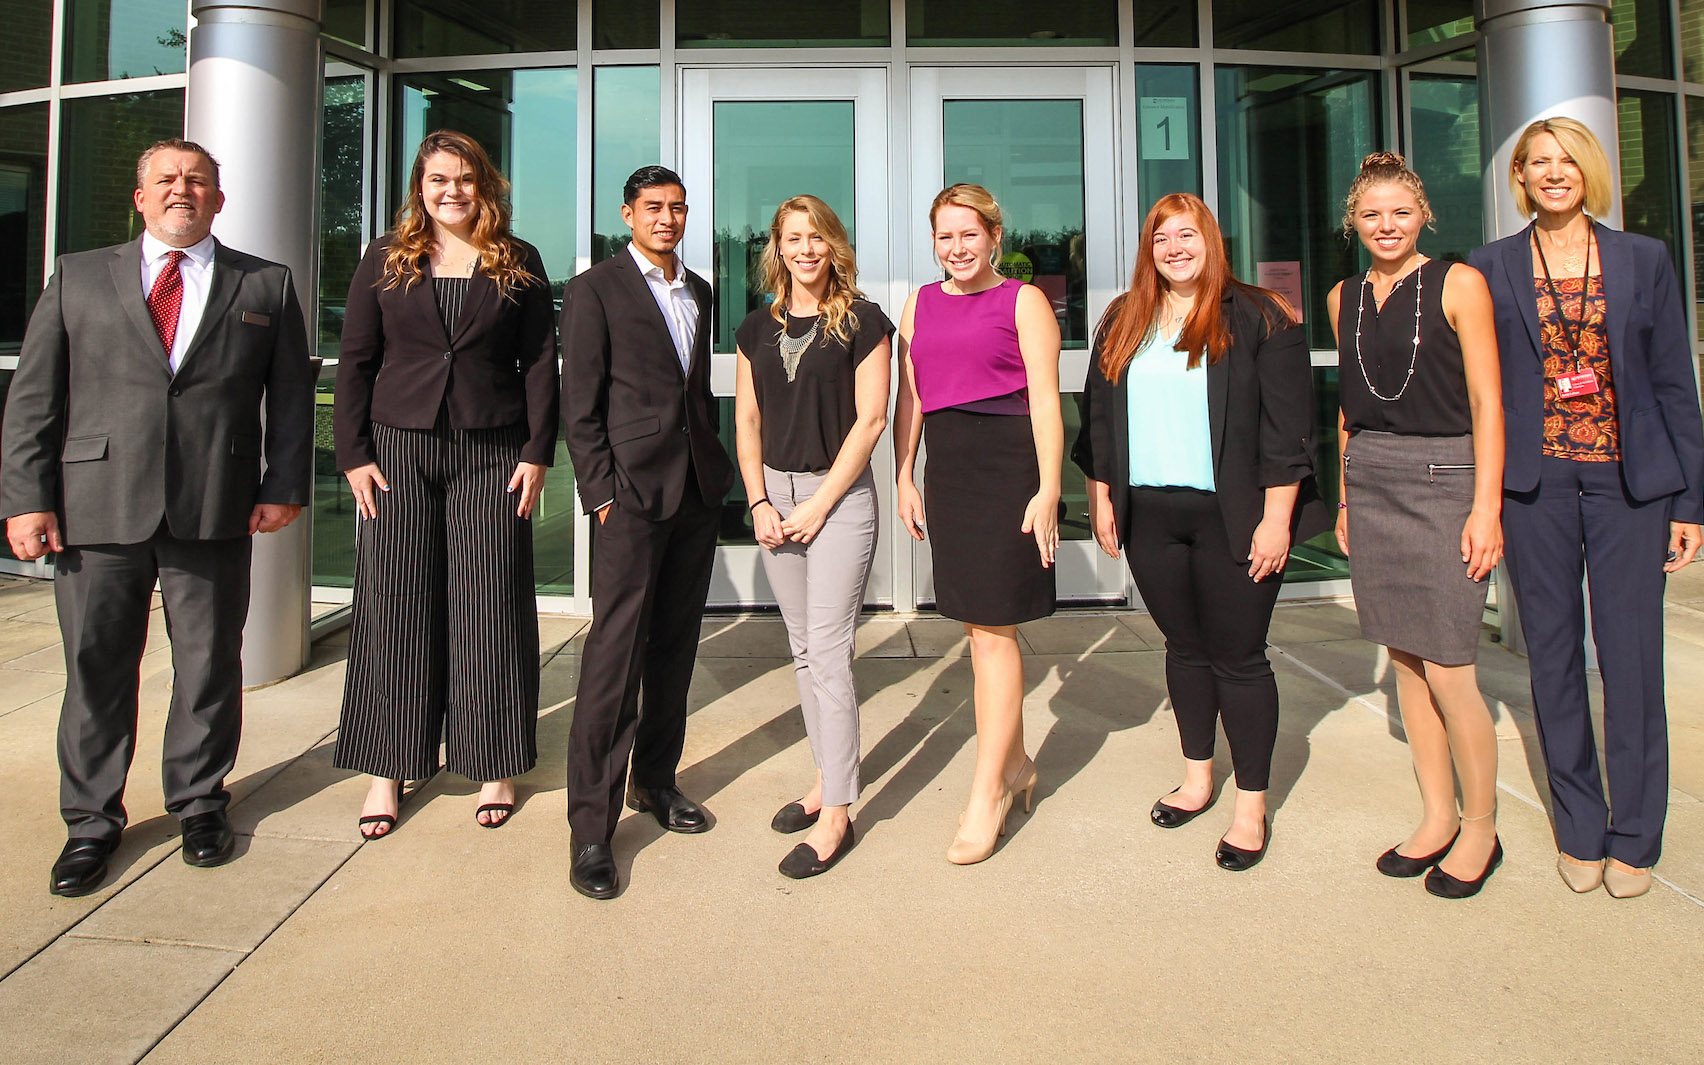 Women in Business club members and advisors dressed professionally and posing in front of the main Benton Harbor Campus entrance.